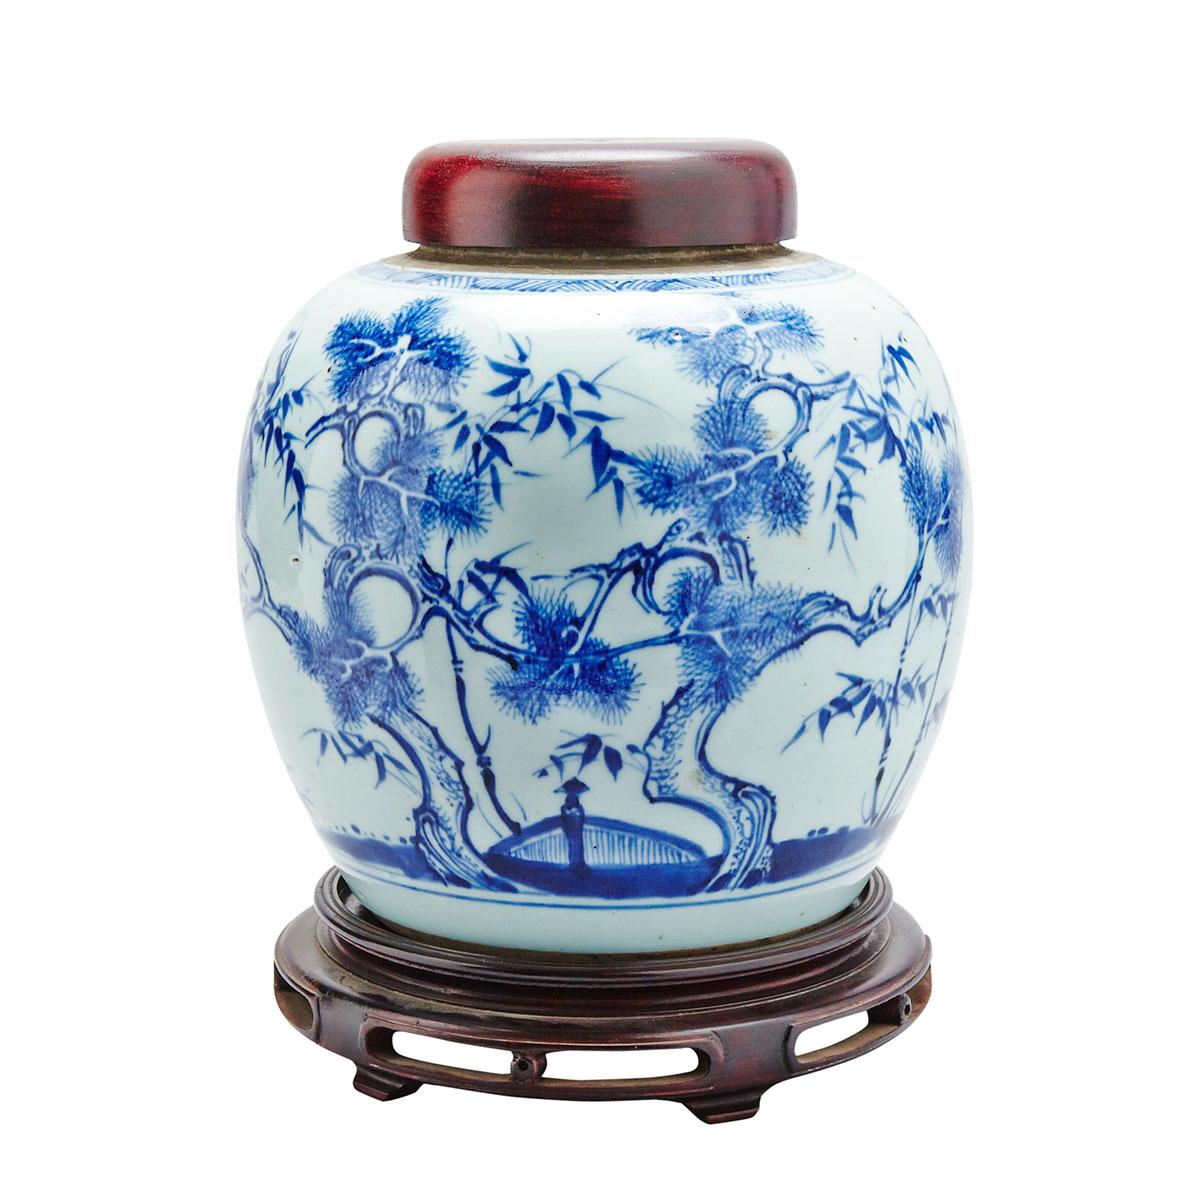 Unusual Export Blue and White ‘Three Friends’ Ginger Jar, Kangxi Period (1662-1722)